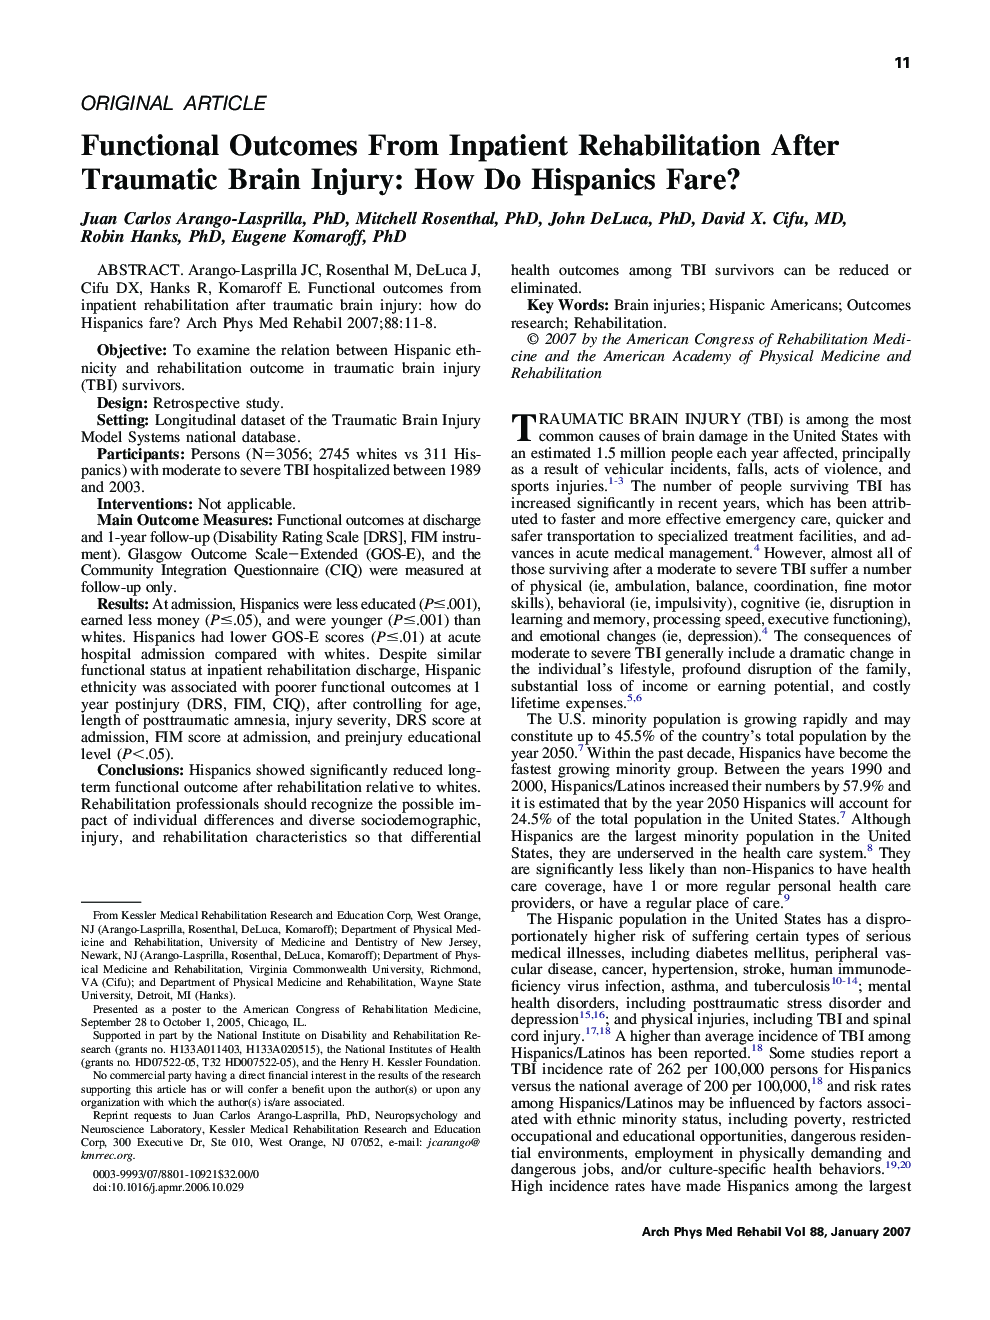 Functional Outcomes From Inpatient Rehabilitation After Traumatic Brain Injury: How Do Hispanics Fare? 